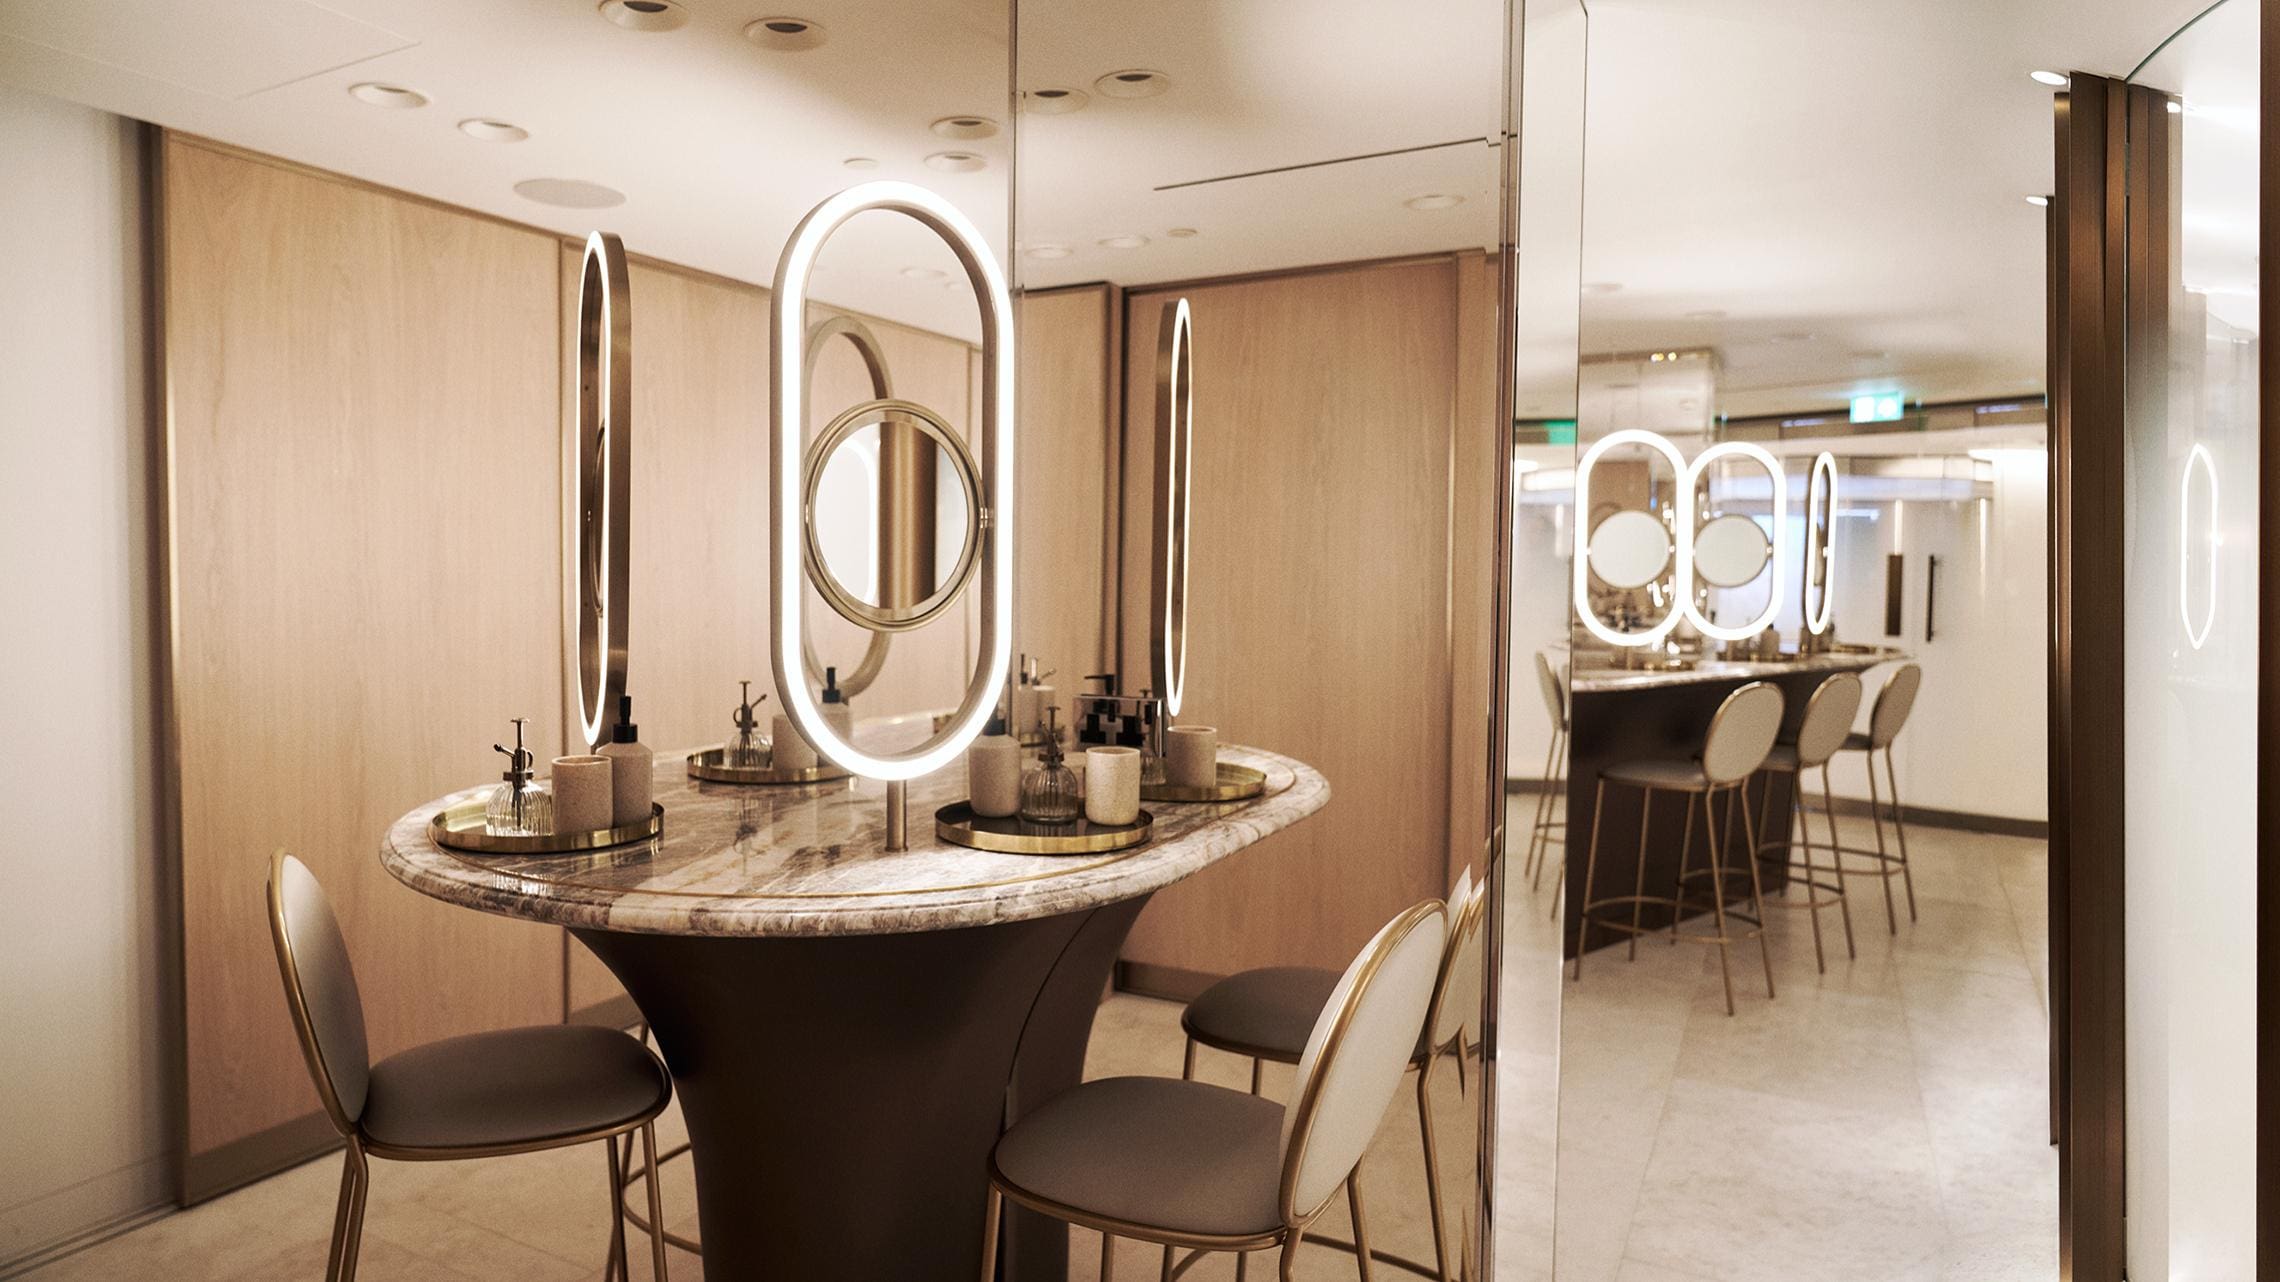 Harrods unveils a rarified new spa and beauty experience – Luxury London